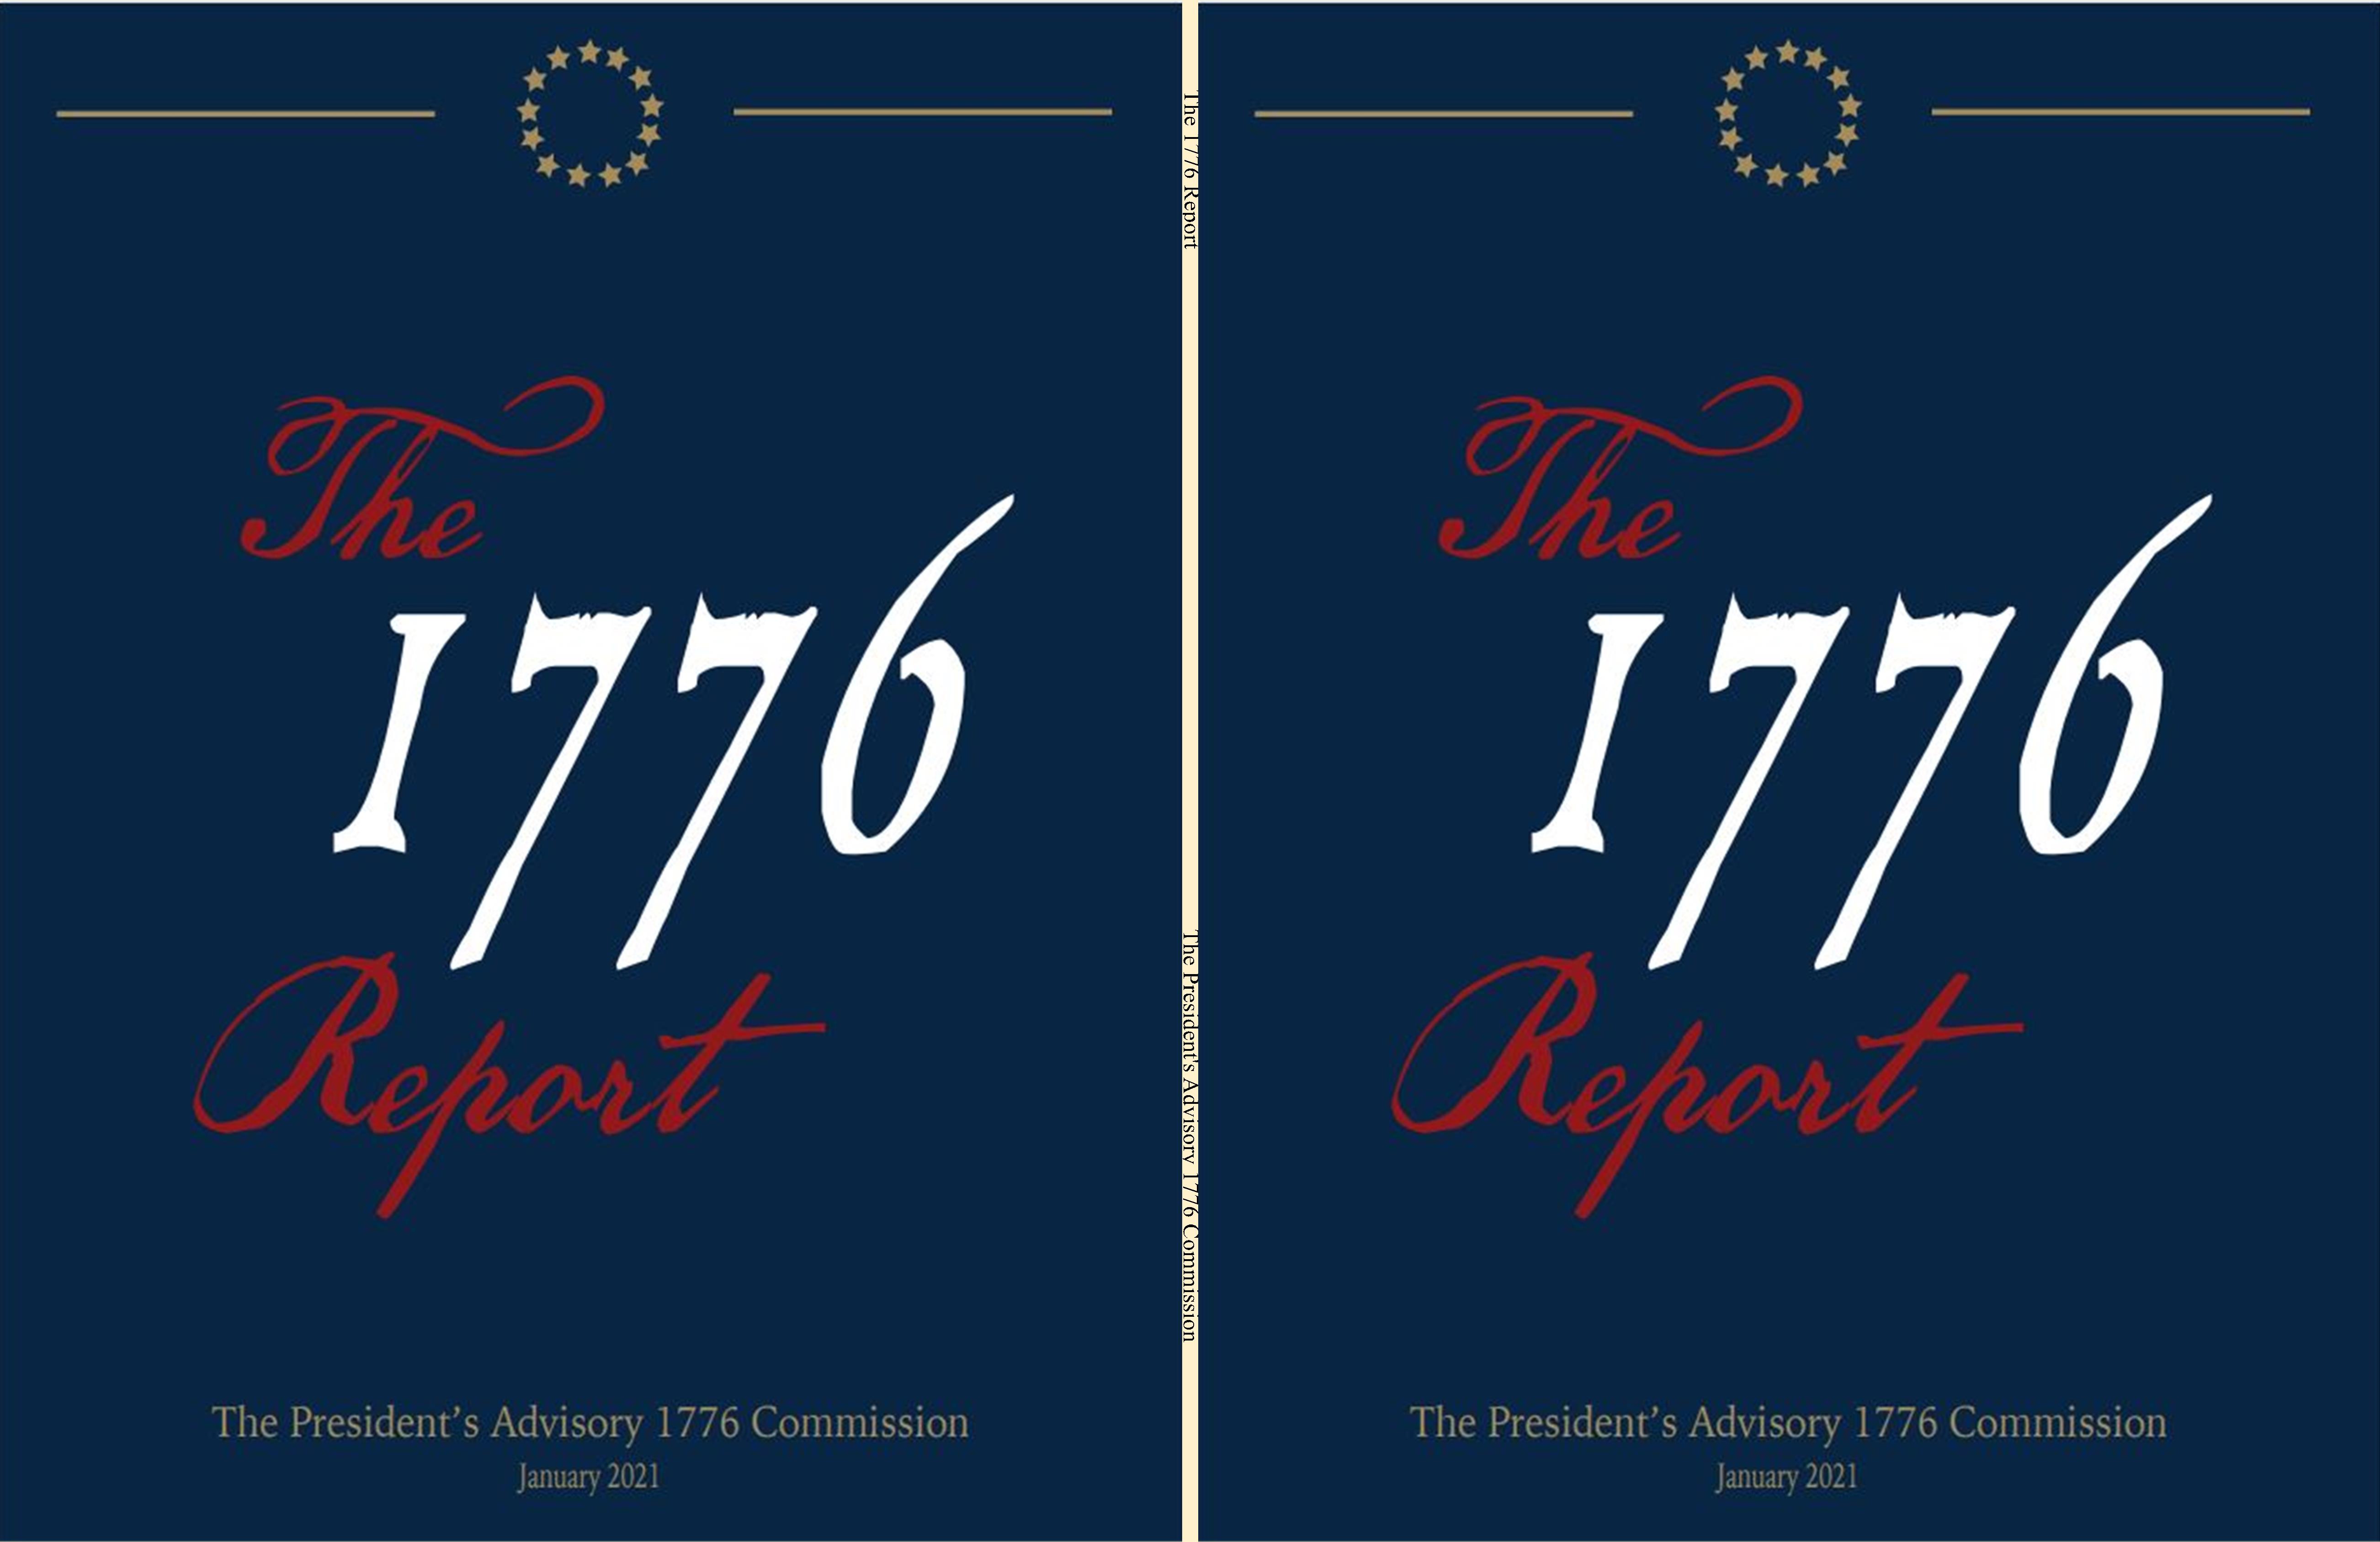 The 1776 Report cover image